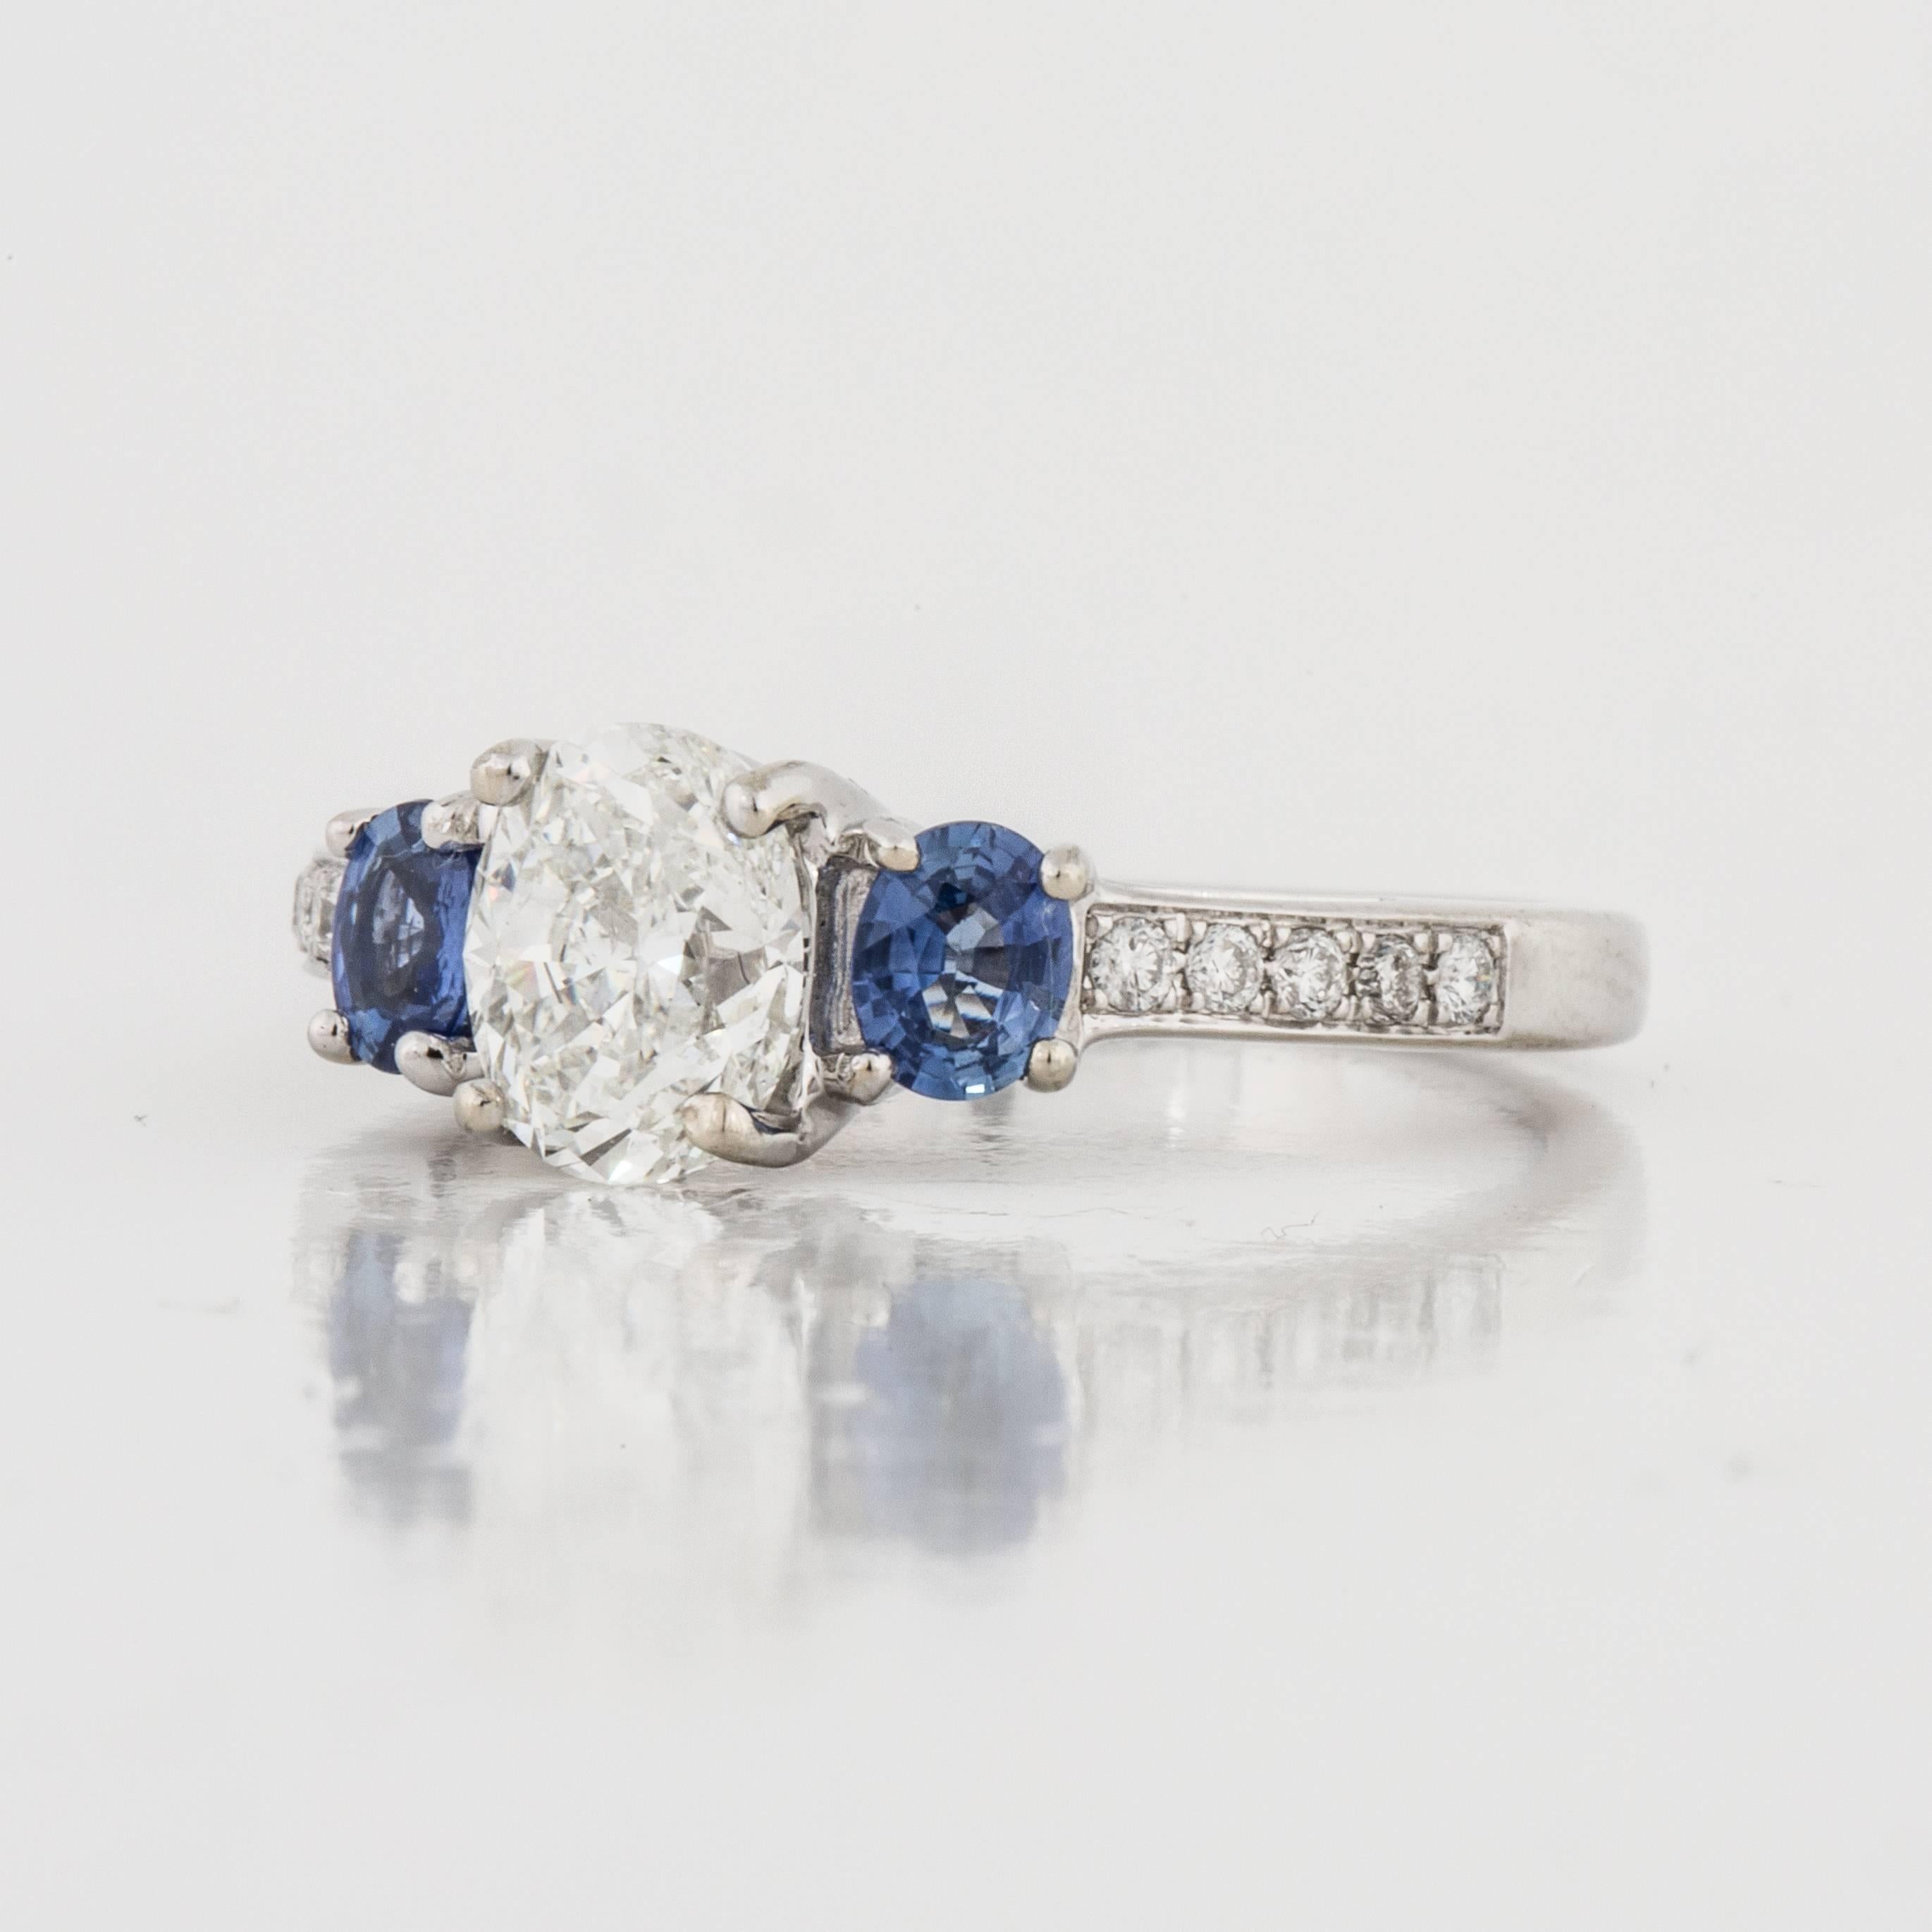 Three-stone diamond and sapphire engagement ring composed of 14K white gold.  The center oval diamond is 0.94 carats, H-I color and SI1-SI2 clarity.  On each side of the central diamond are two oval shaped blue sapphires that total 0.40 carats. 